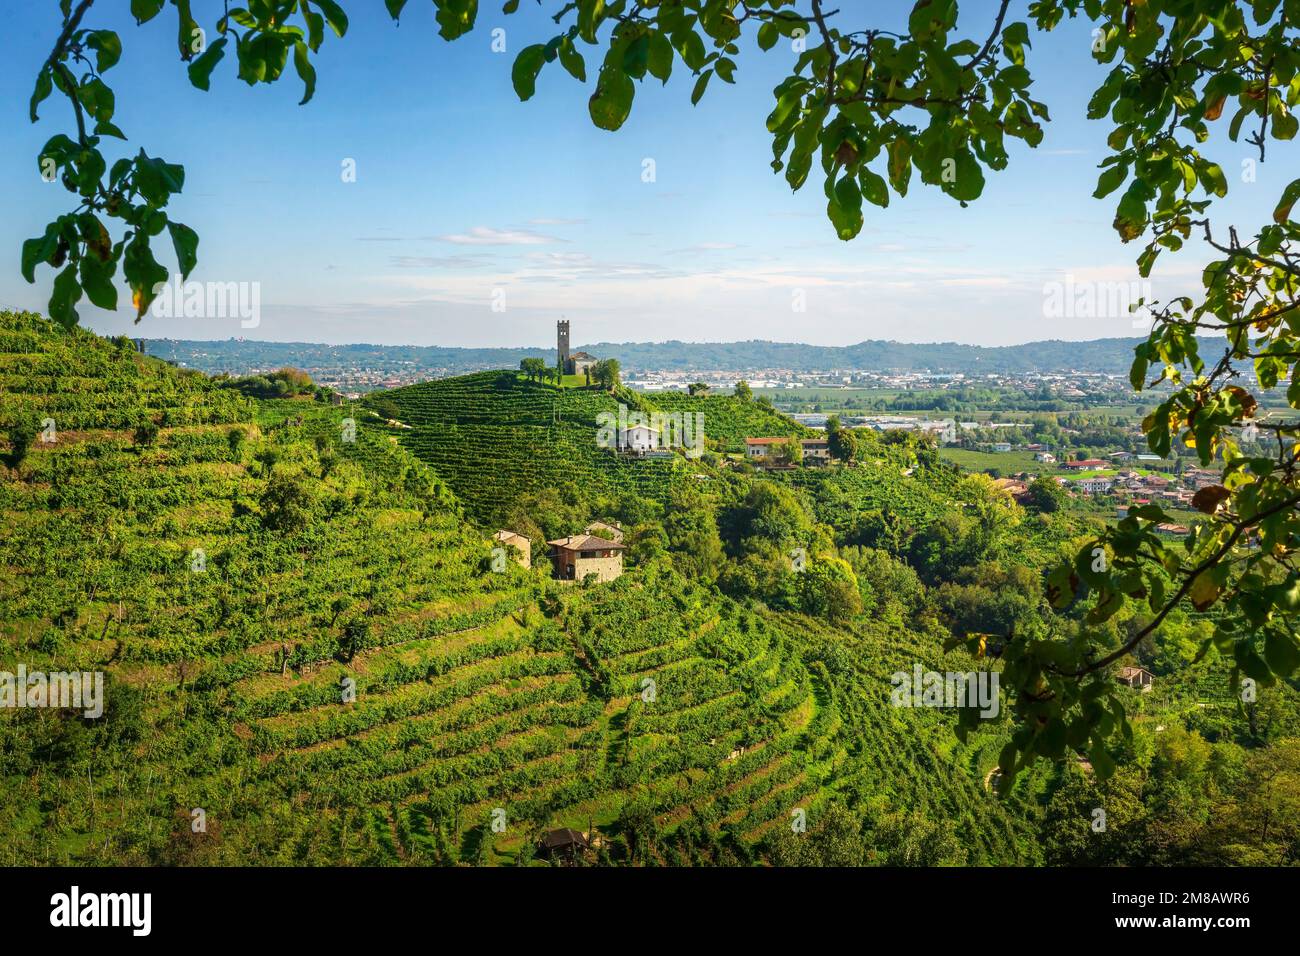 Prosecco Hills, vineyards and San Lorenzo church on the top of the hills. Leaves of a tree as a frame. Unesco world heritage site. Farra di Soligo. Ve Stock Photo